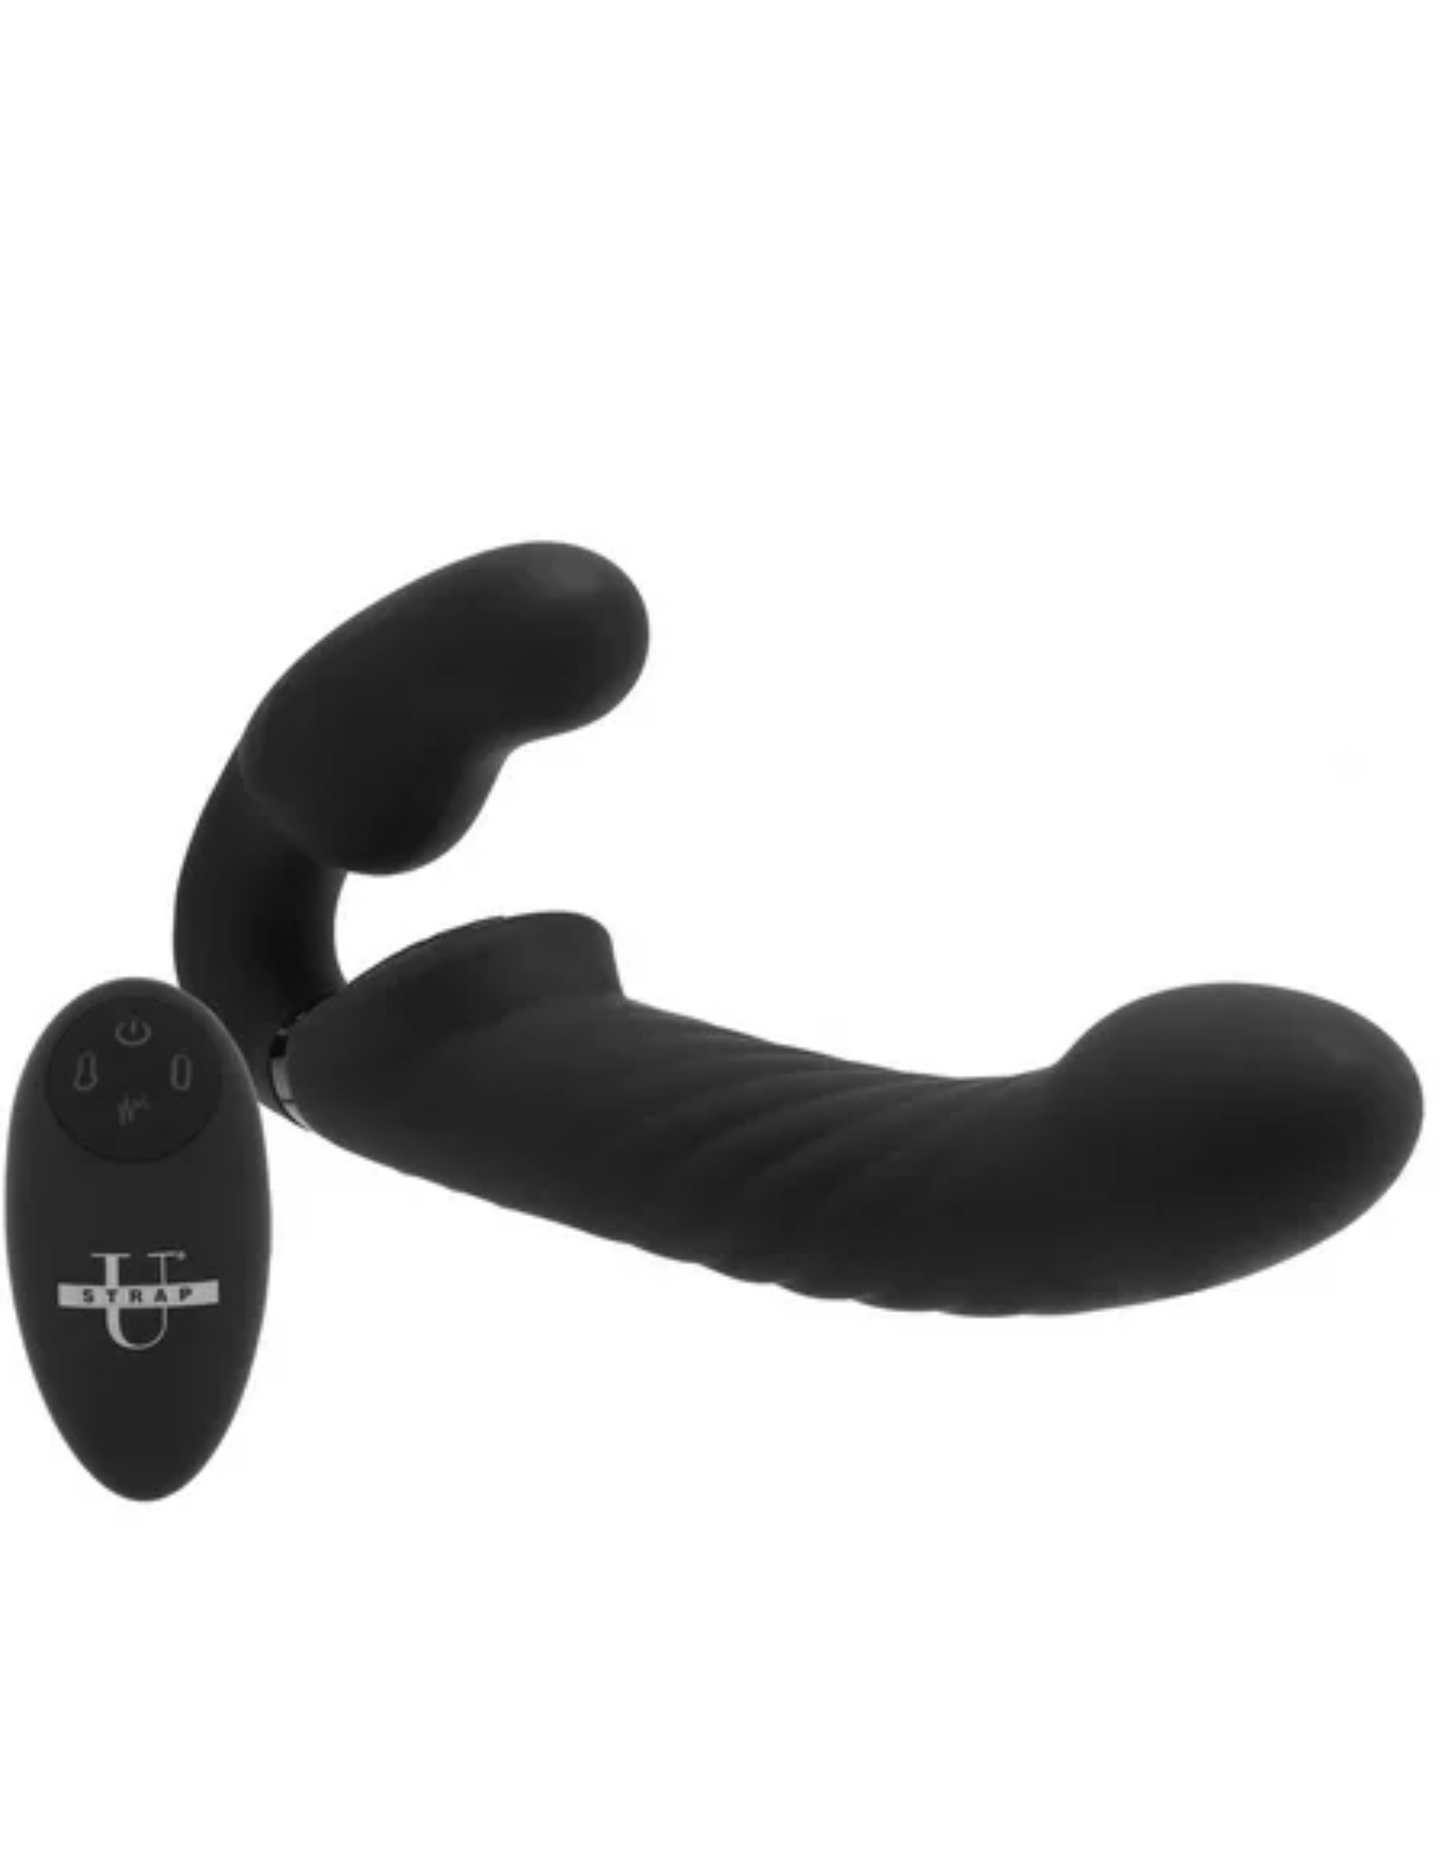 Front angled view of the Strap U Ergo-Fit Twist Inflatable Strapless Strap-On from XR Brands (black) shows its unique twisted texture as well as the inflatable bulb.